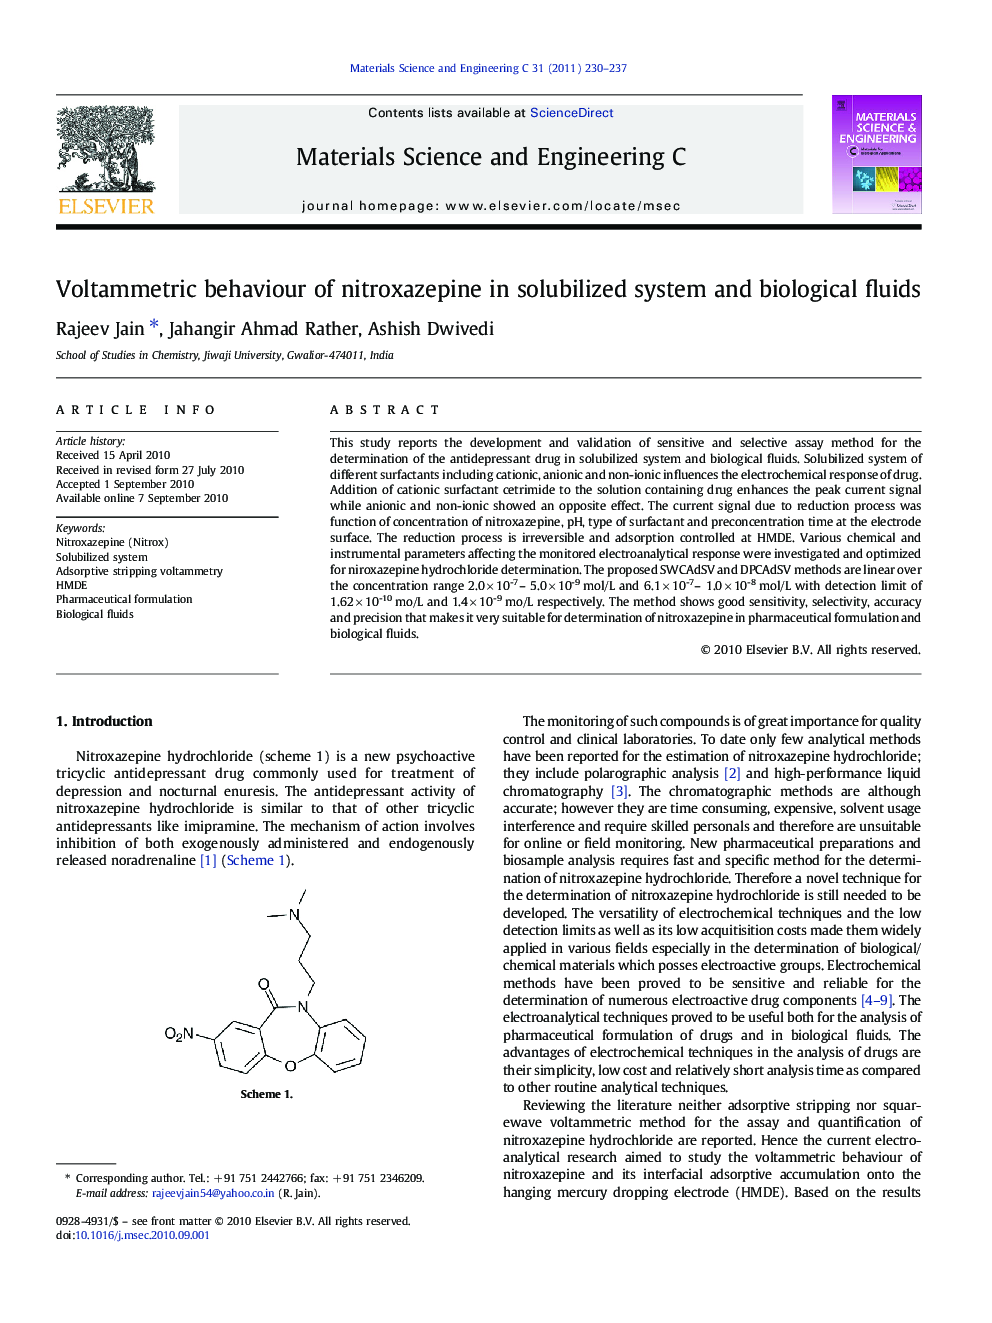 Voltammetric behaviour of nitroxazepine in solubilized system and biological fluids